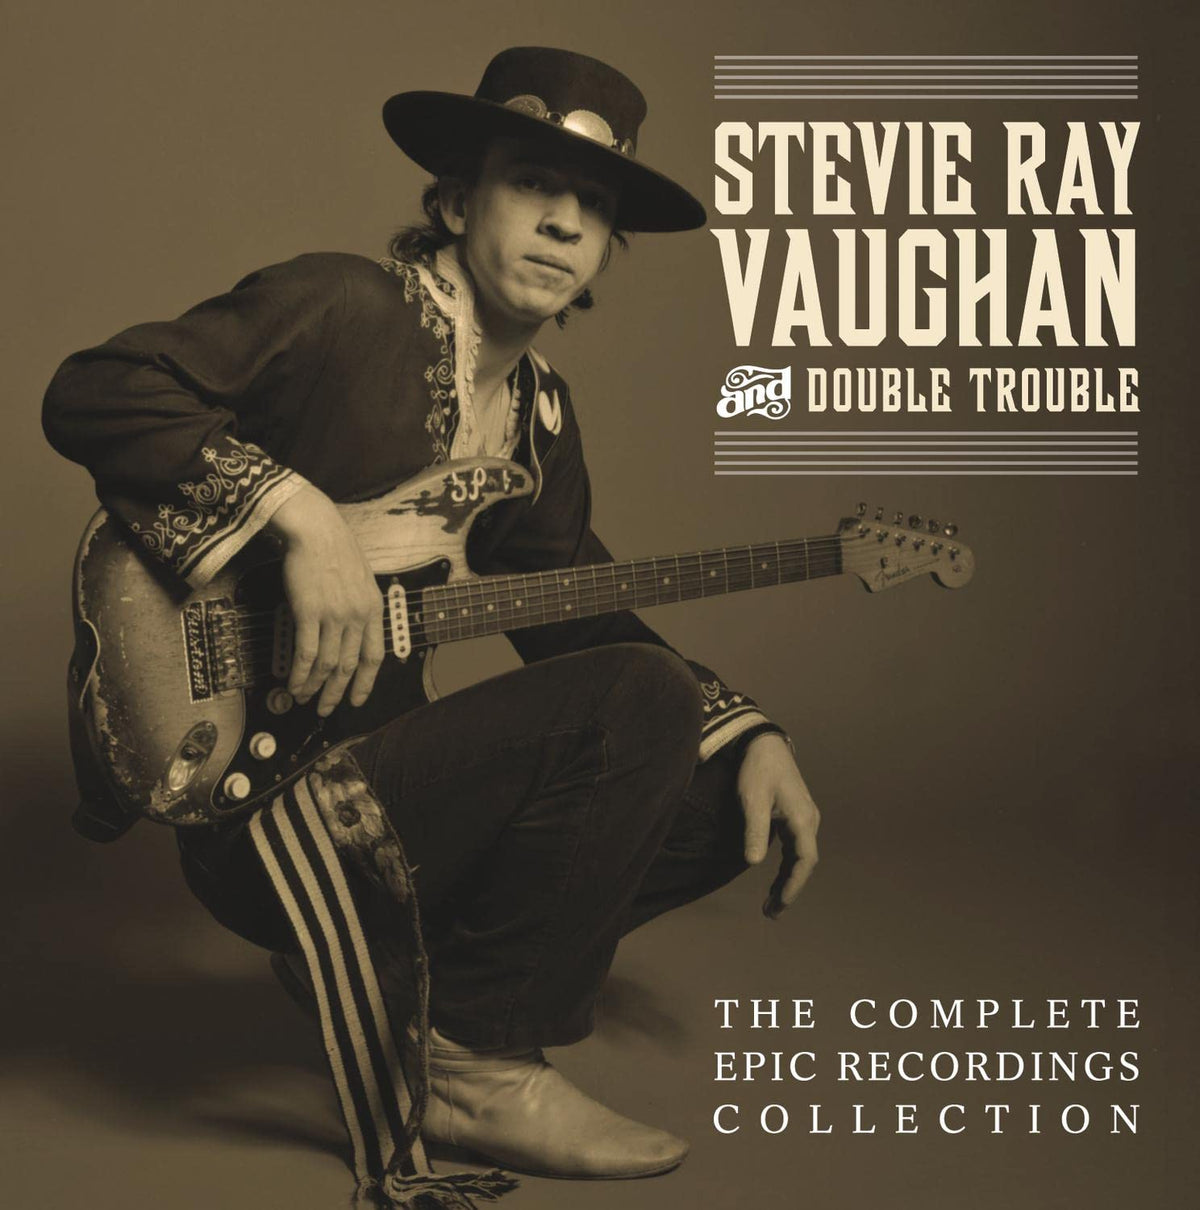 Stevie Ray Vaughan & Double Trouble - The Complete Epic Recordings Collection - 12 CD Box Set